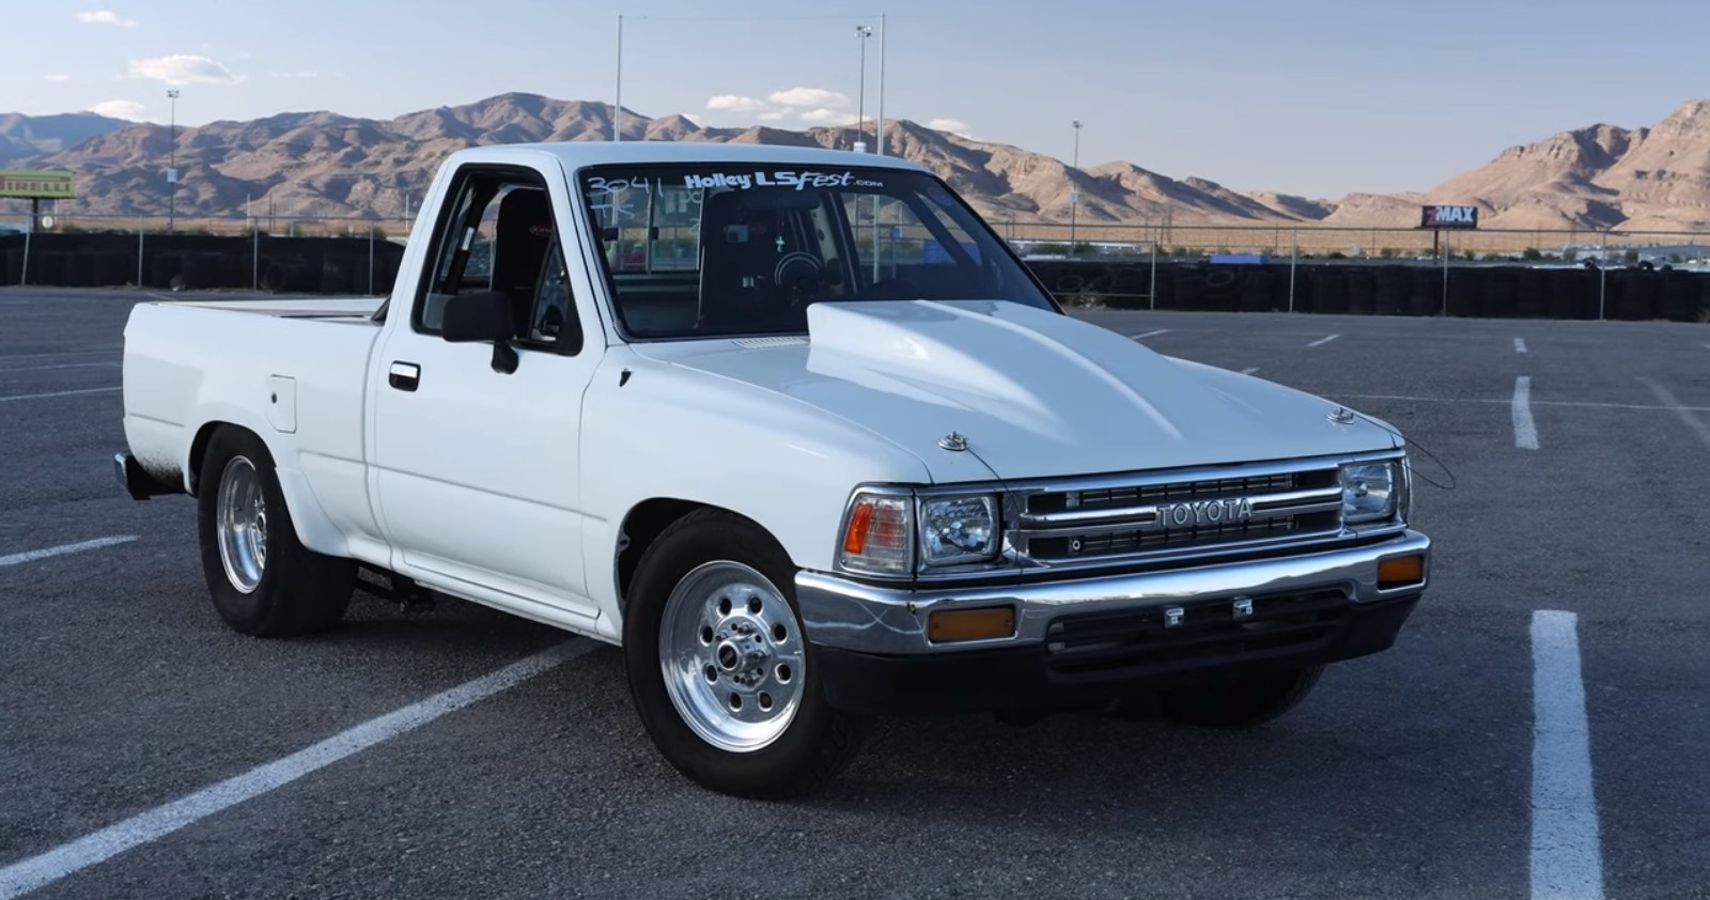 Larry Chen YouTube Channel 1989 White Toyota Hilux LS swap Front Side vide